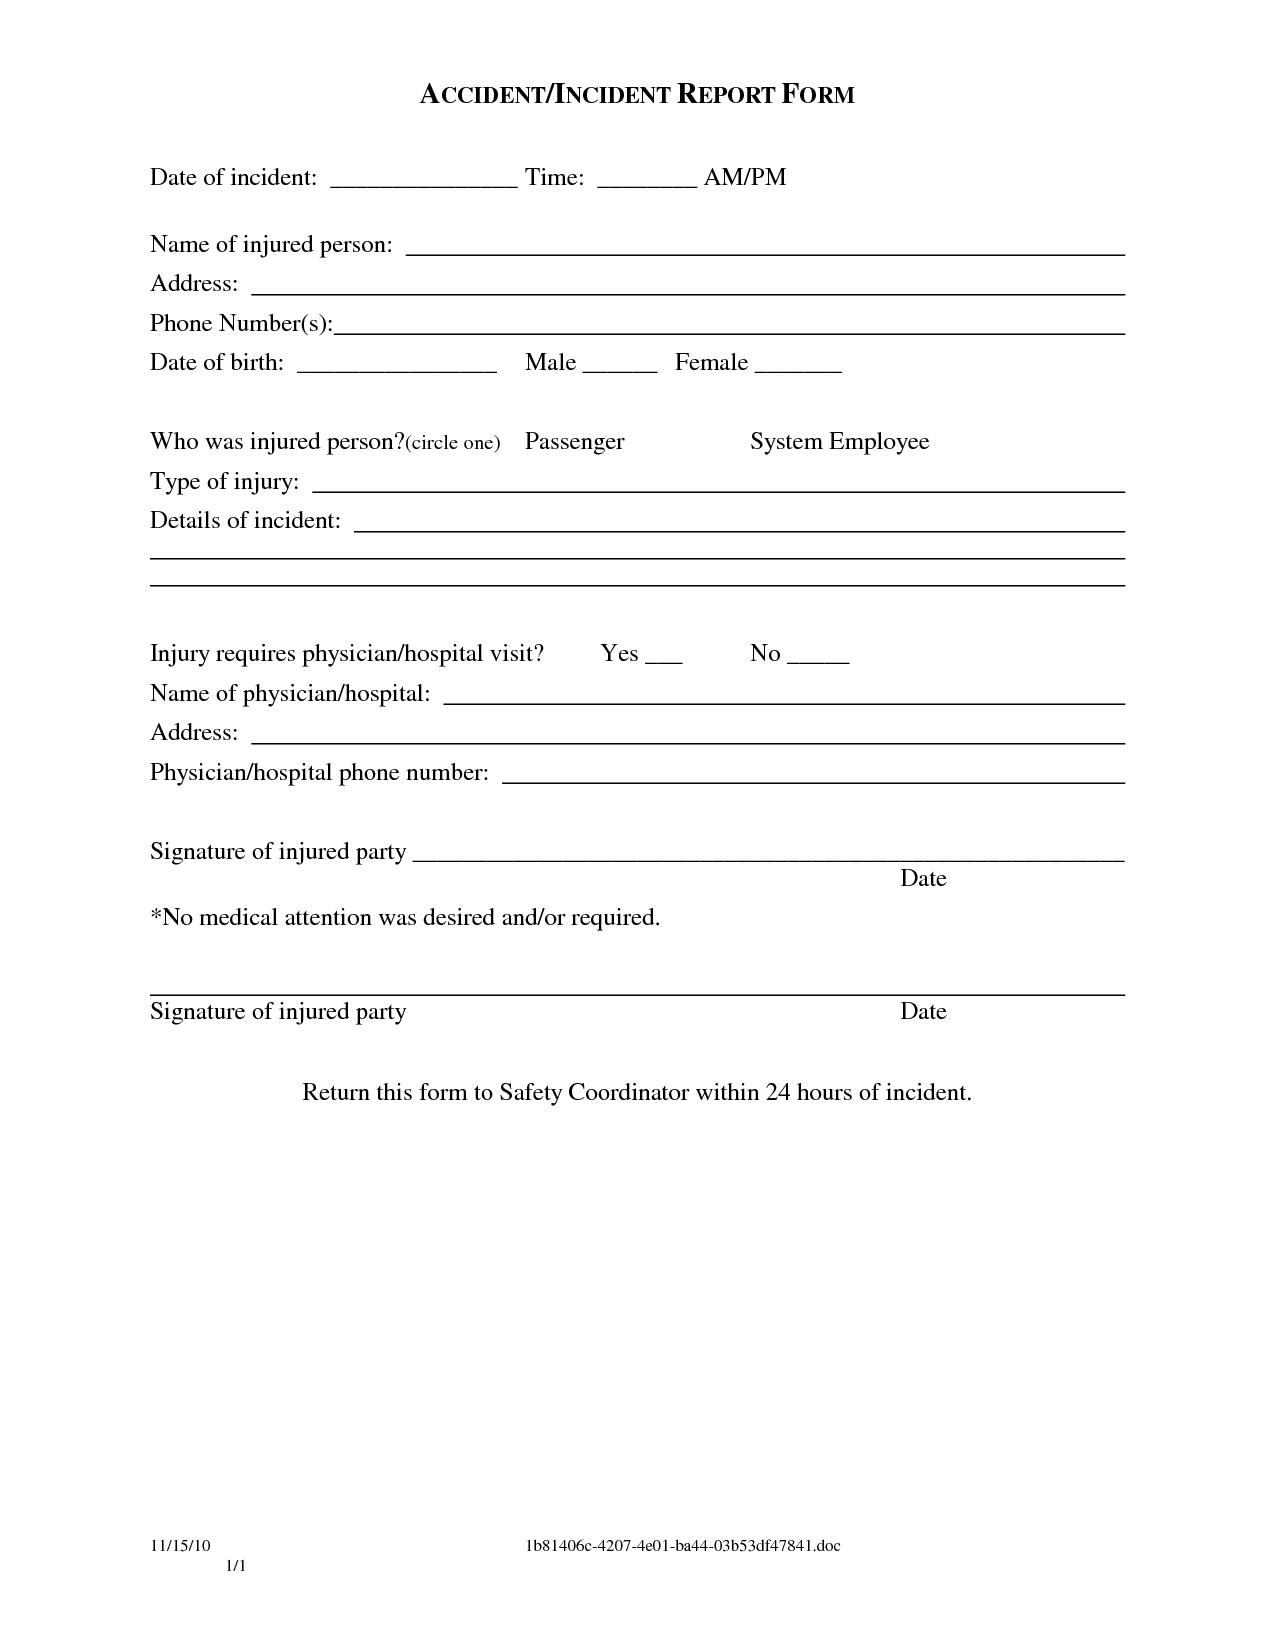 Sample Police Incident Report Template Images - Police Report - Free Printable Incident Report Form